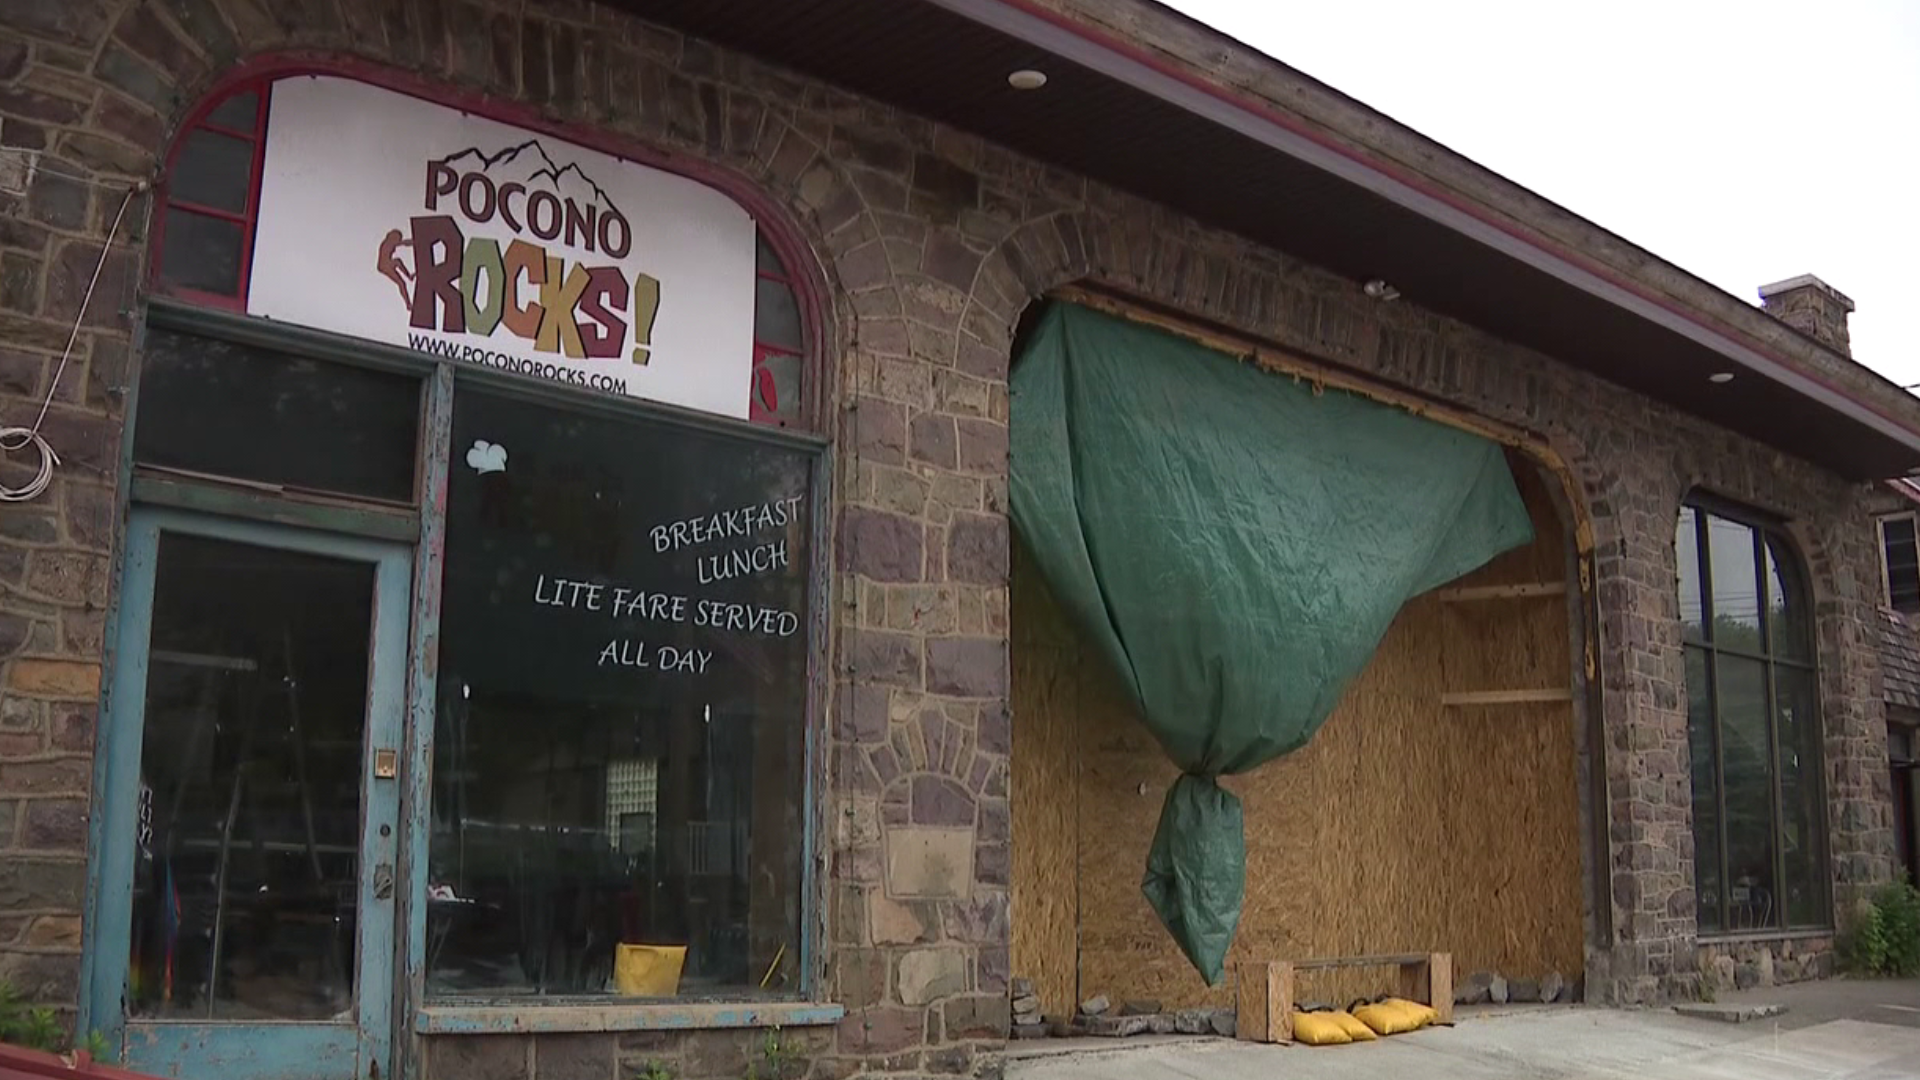 It's been almost a month since two cars crashed into a business in the Poconos. The place was left badly damaged and has been closed ever since.